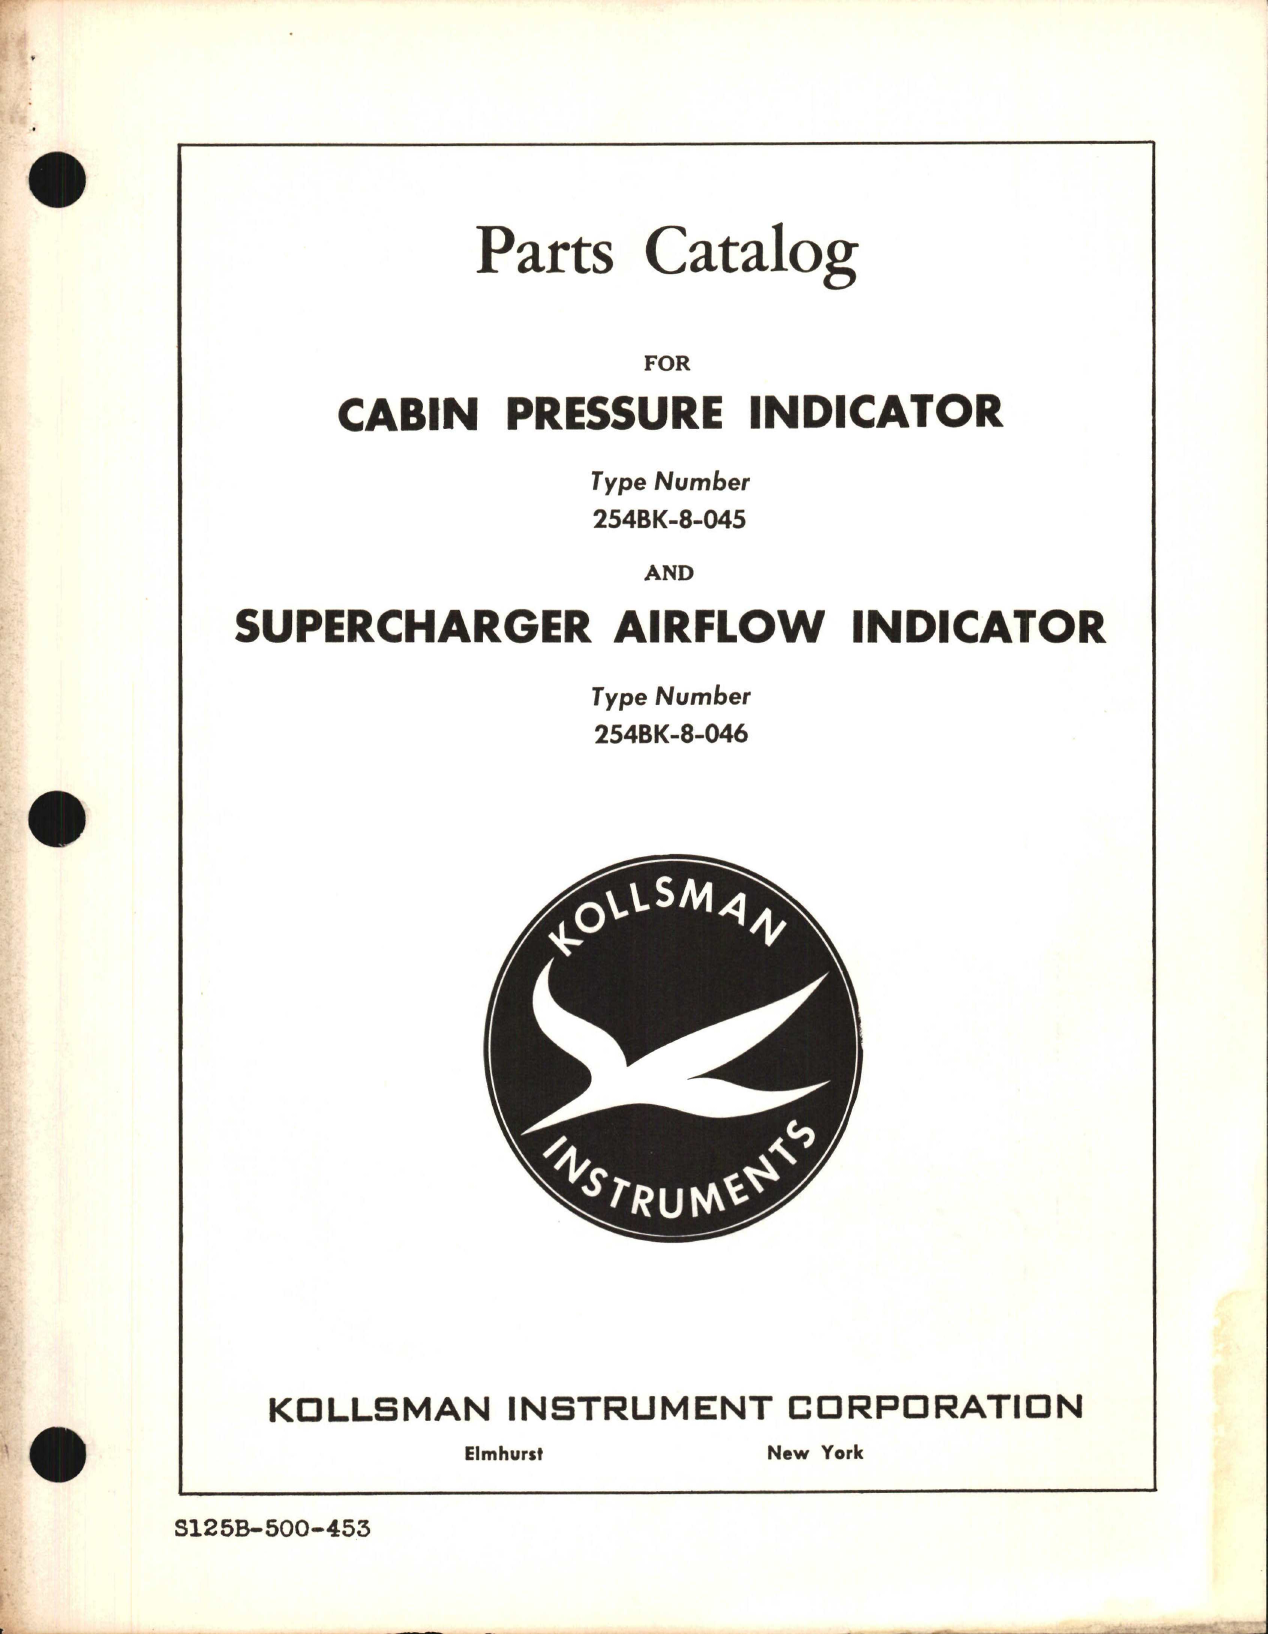 Sample page 1 from AirCorps Library document: Parts Catalog for Kollsman Cabin Pressure Indicator and Supercharger Airflow Indicator